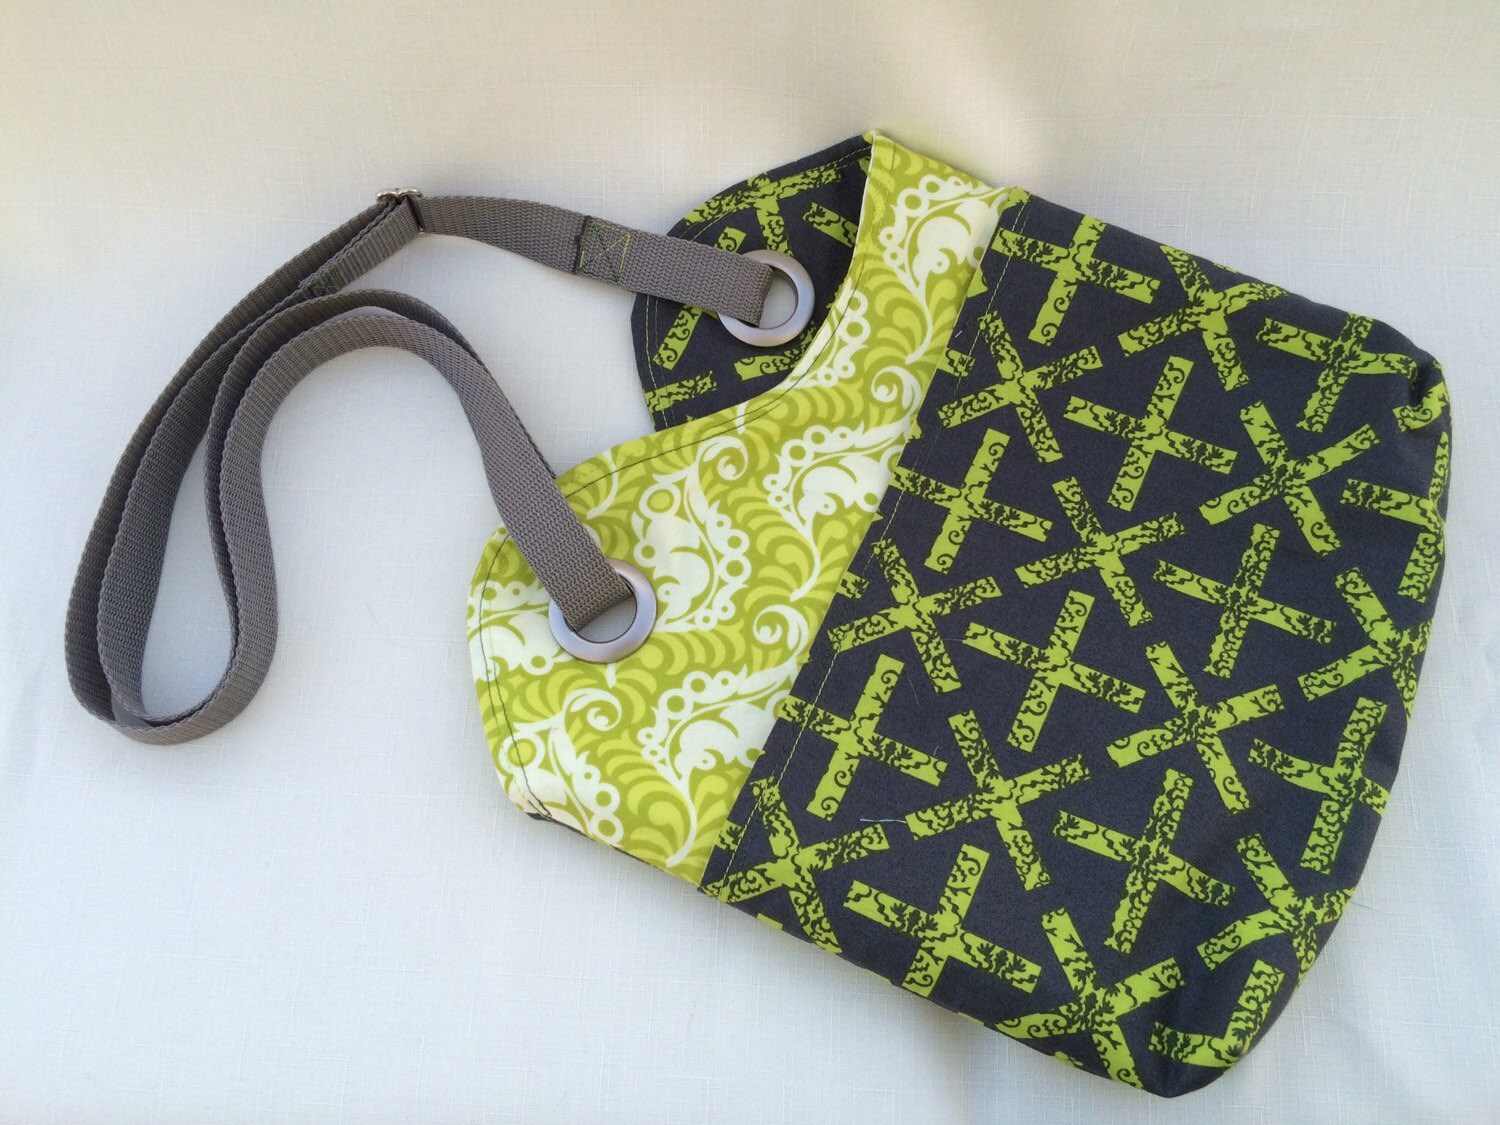 Two Tone Sling Bag green/gray by Dagittbags on Etsy